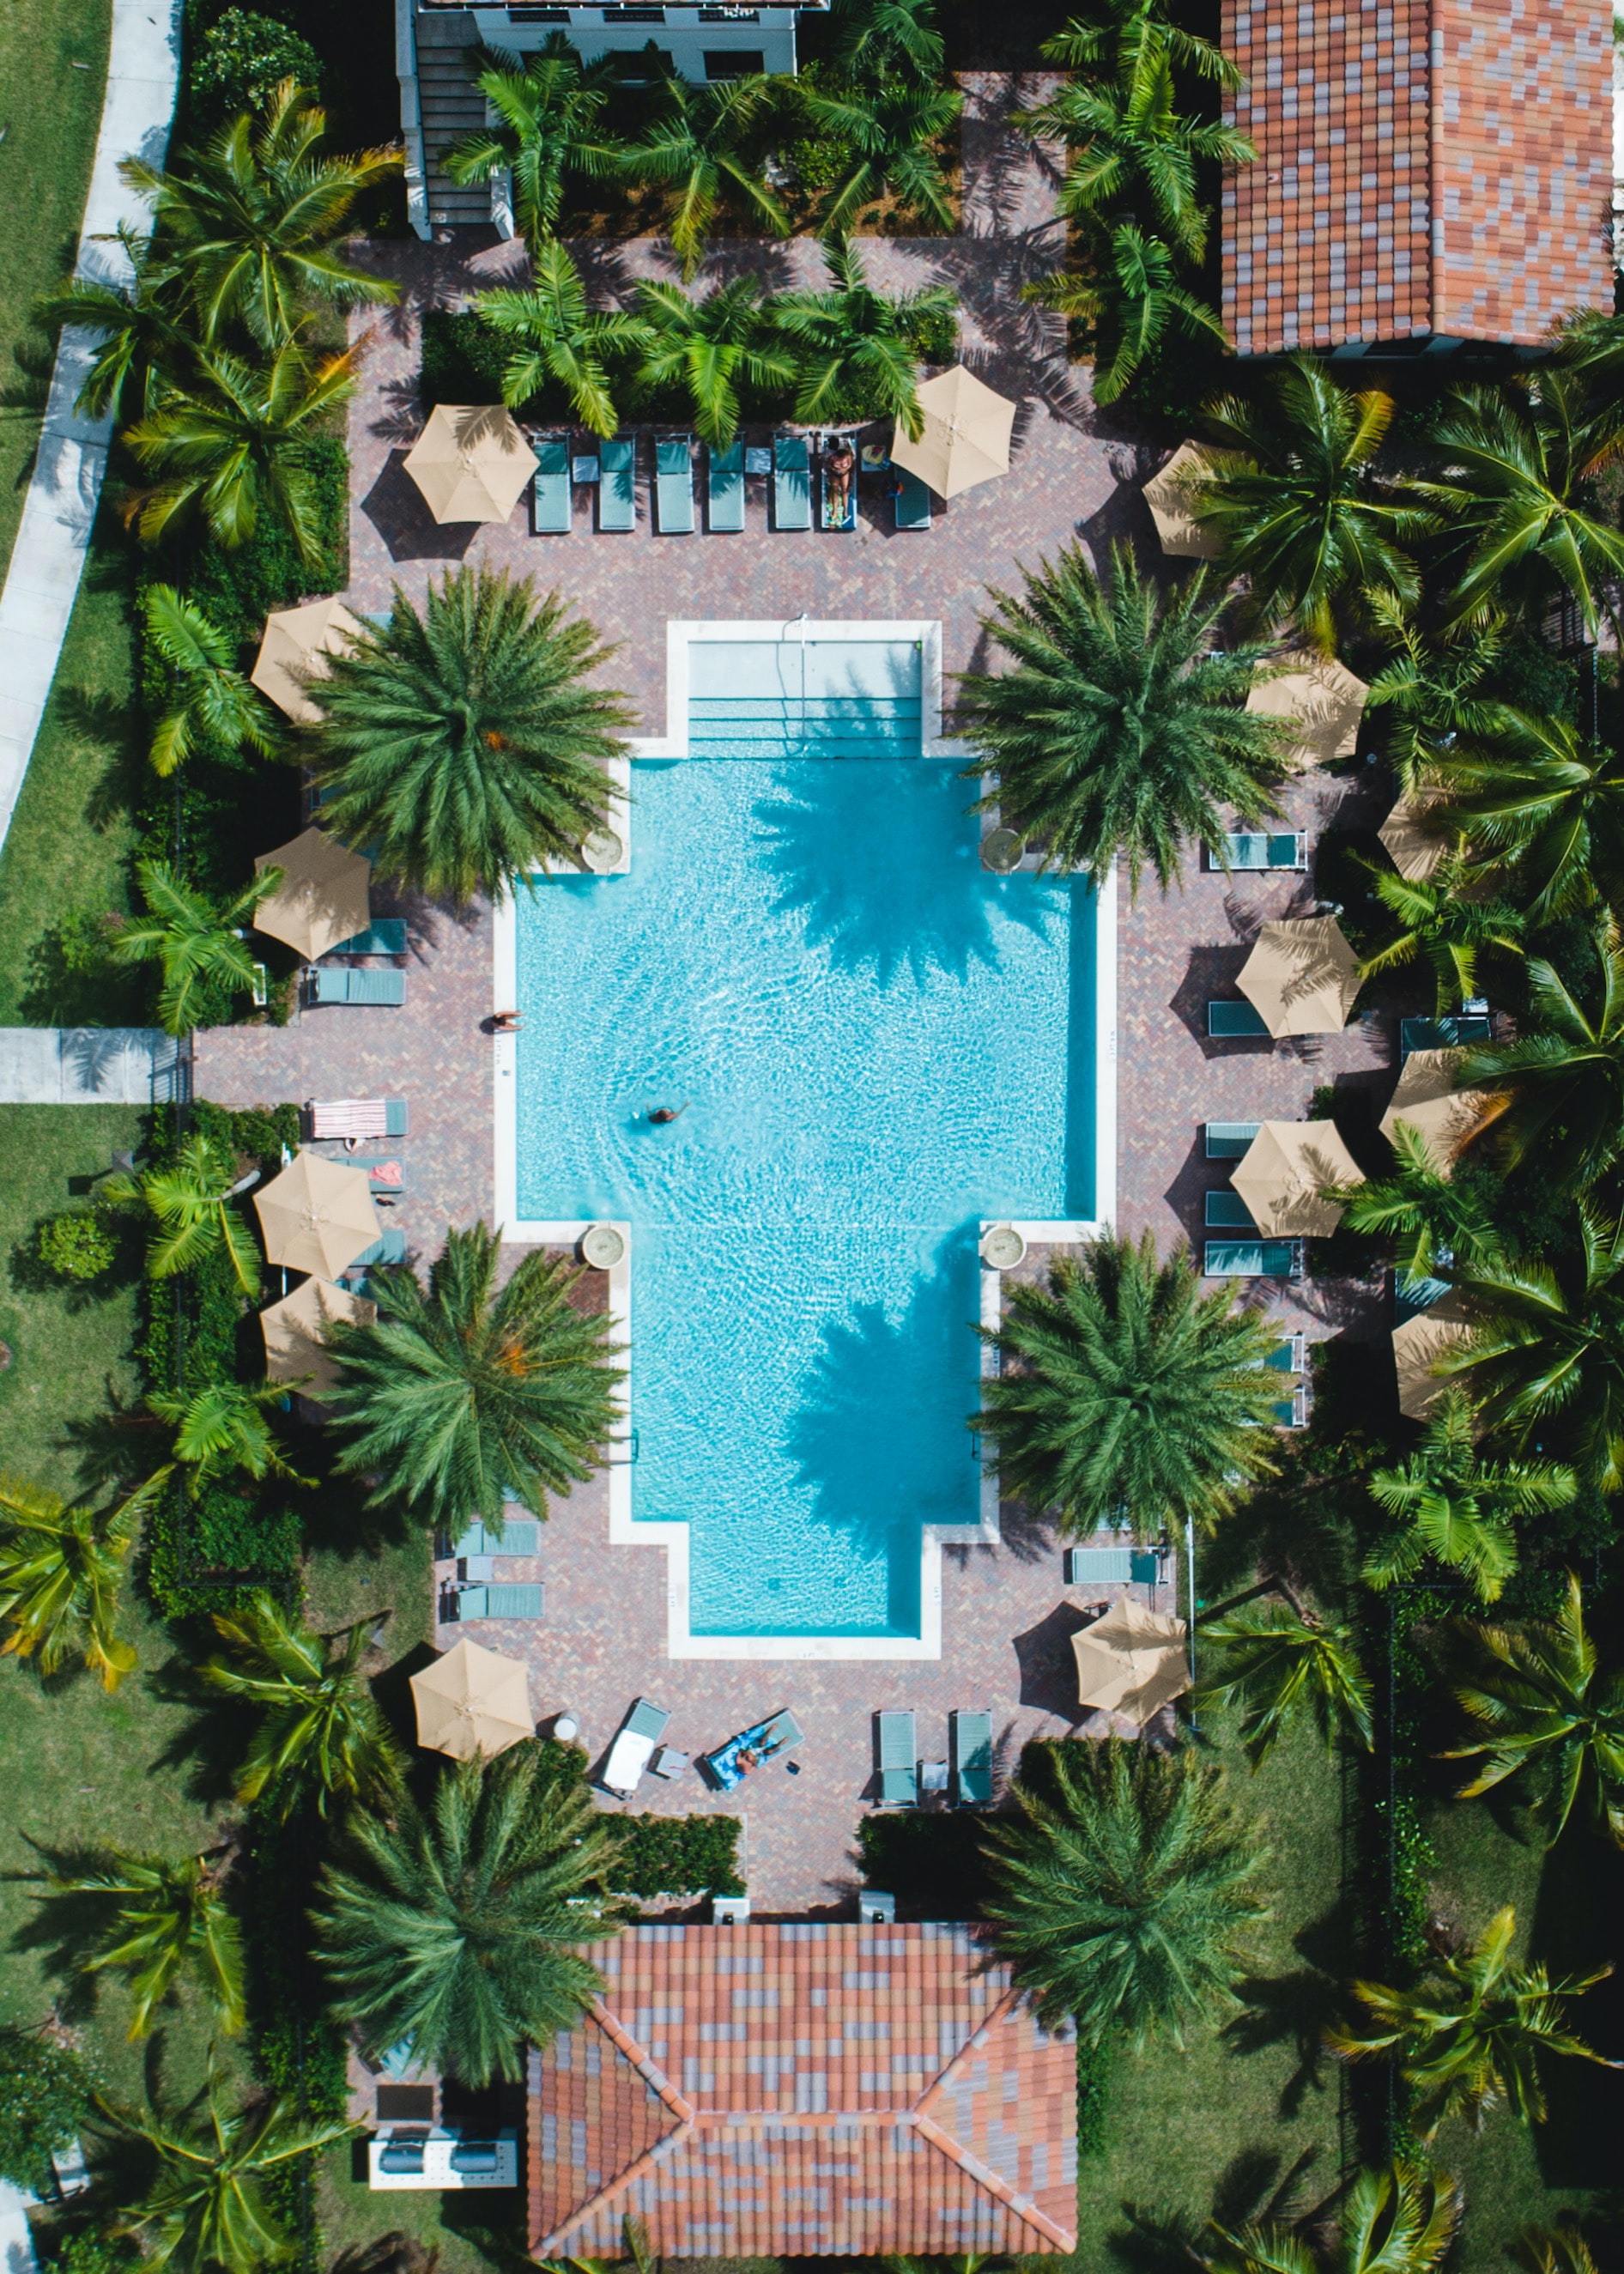 wallpapers view from above, palms, pool, miscellanea, miscellaneous